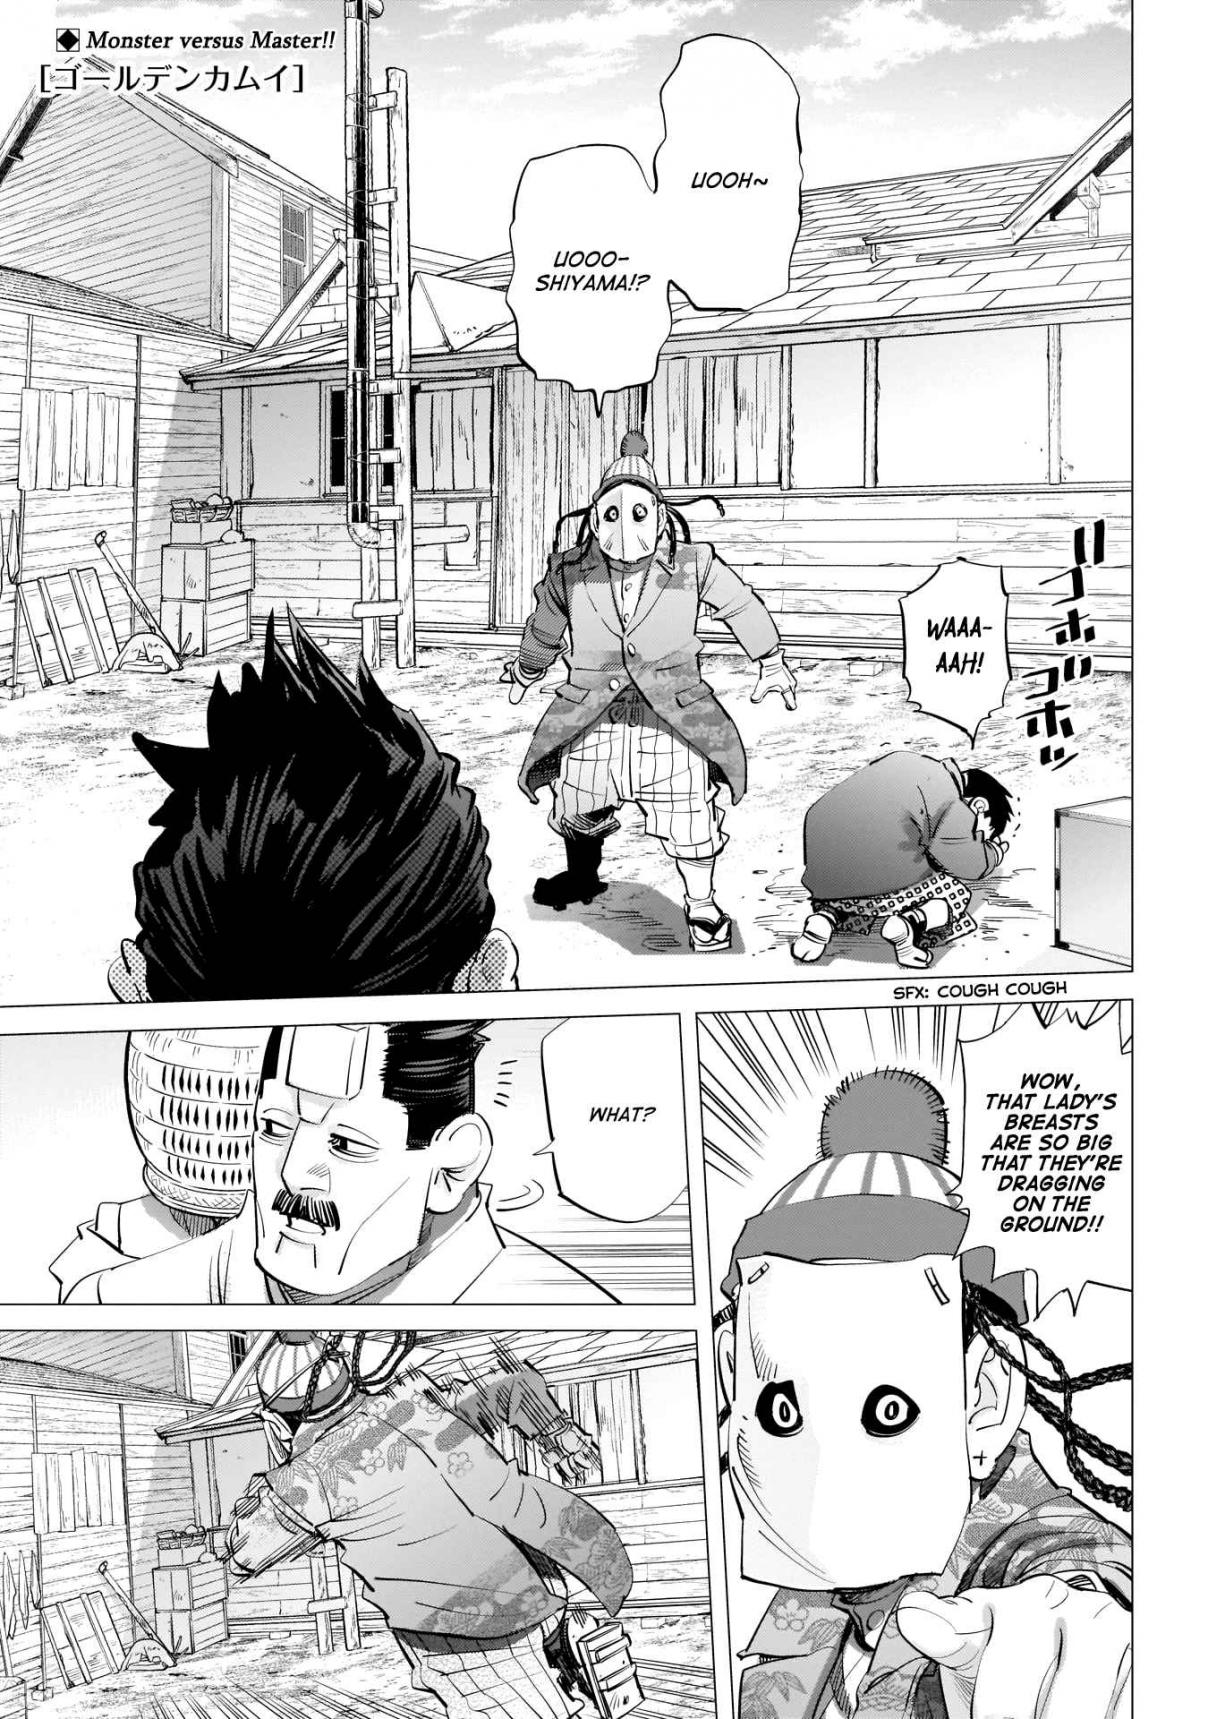 Golden Kamuy Ch. 245 Town of Reunions